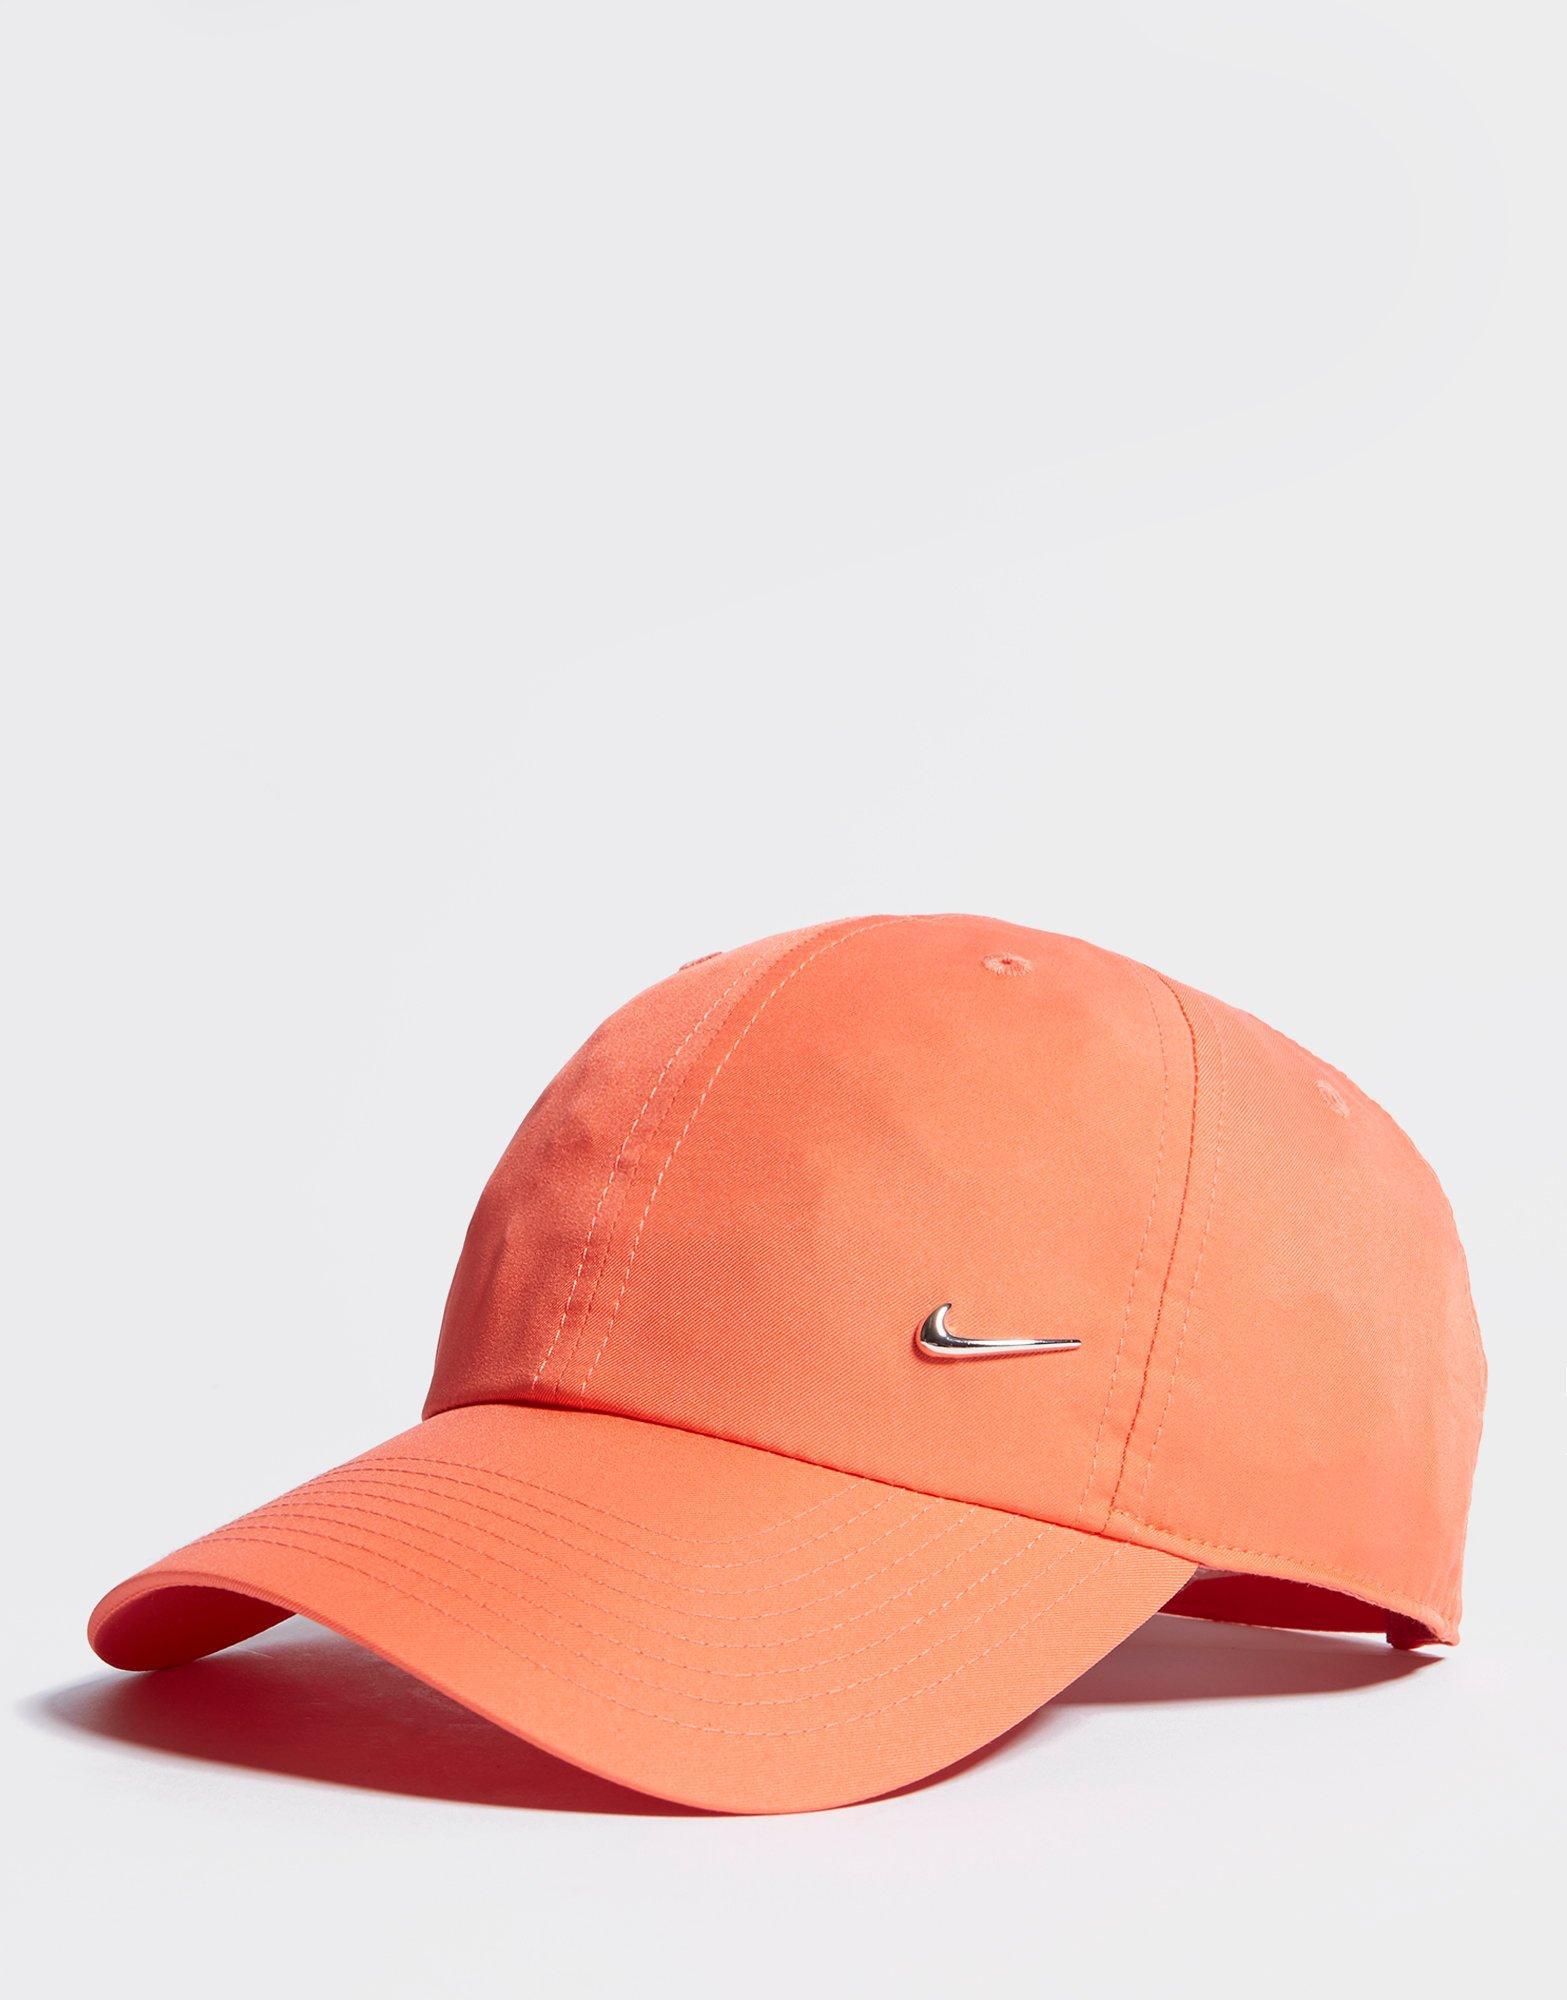 Nike Cotton Side Swoosh Cap in Coral 